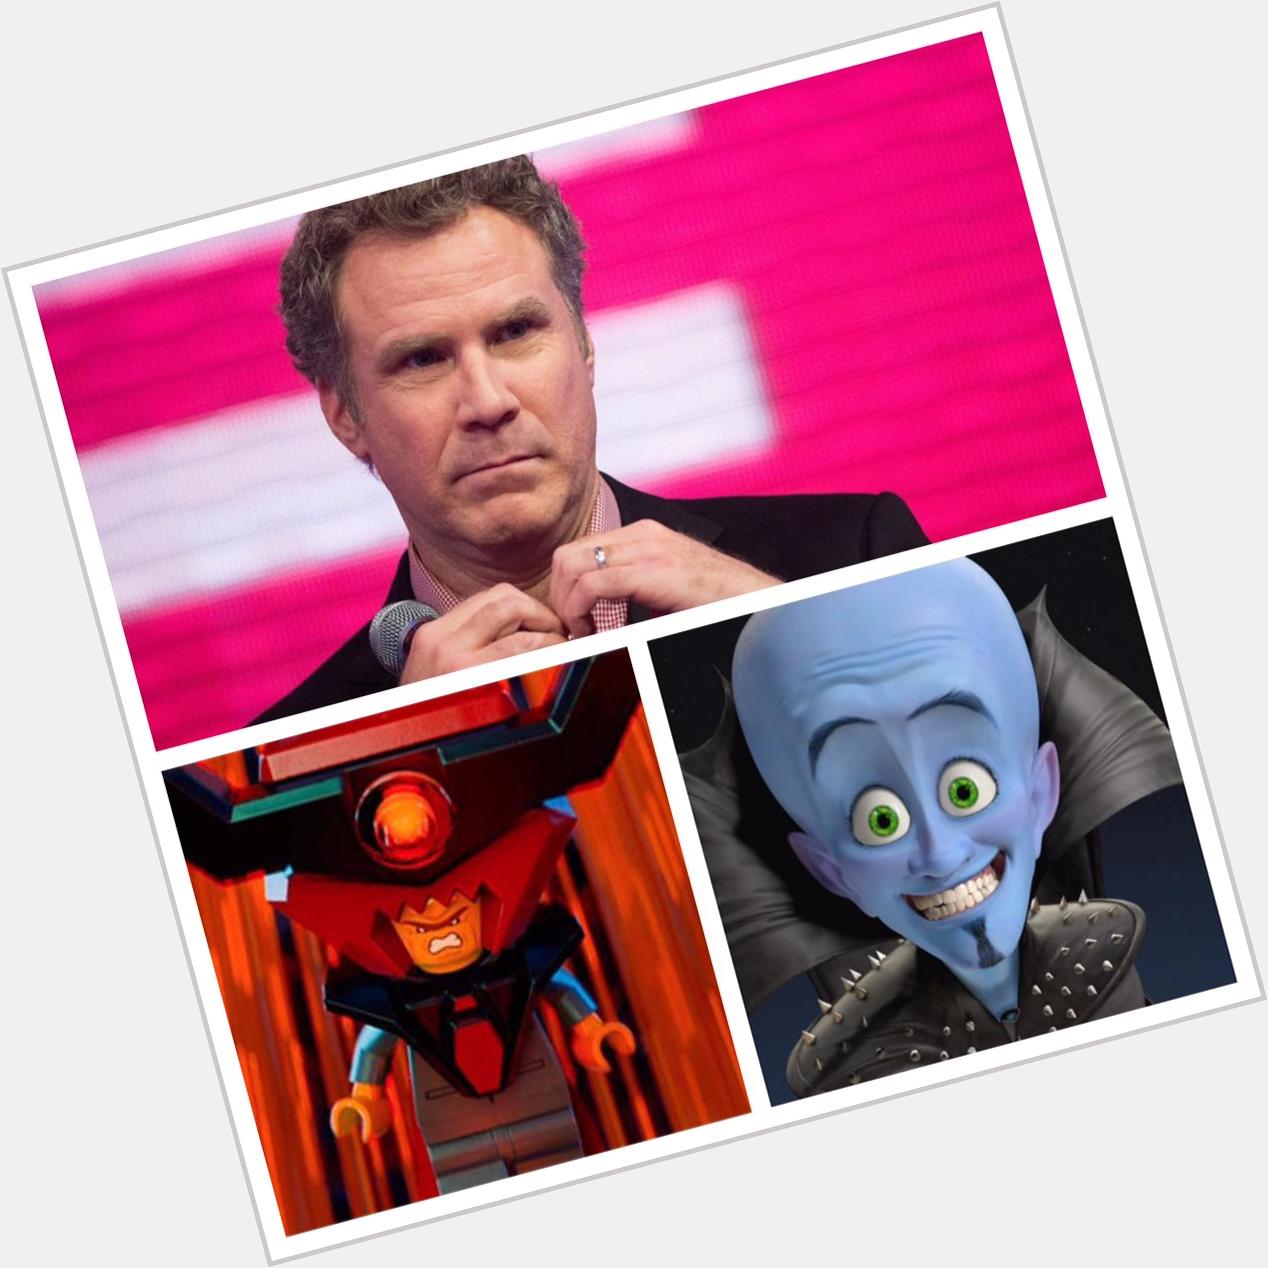 Happy Birthday Will Ferrell. Which villain would you choose to battle with Lord Business or Megamind? 